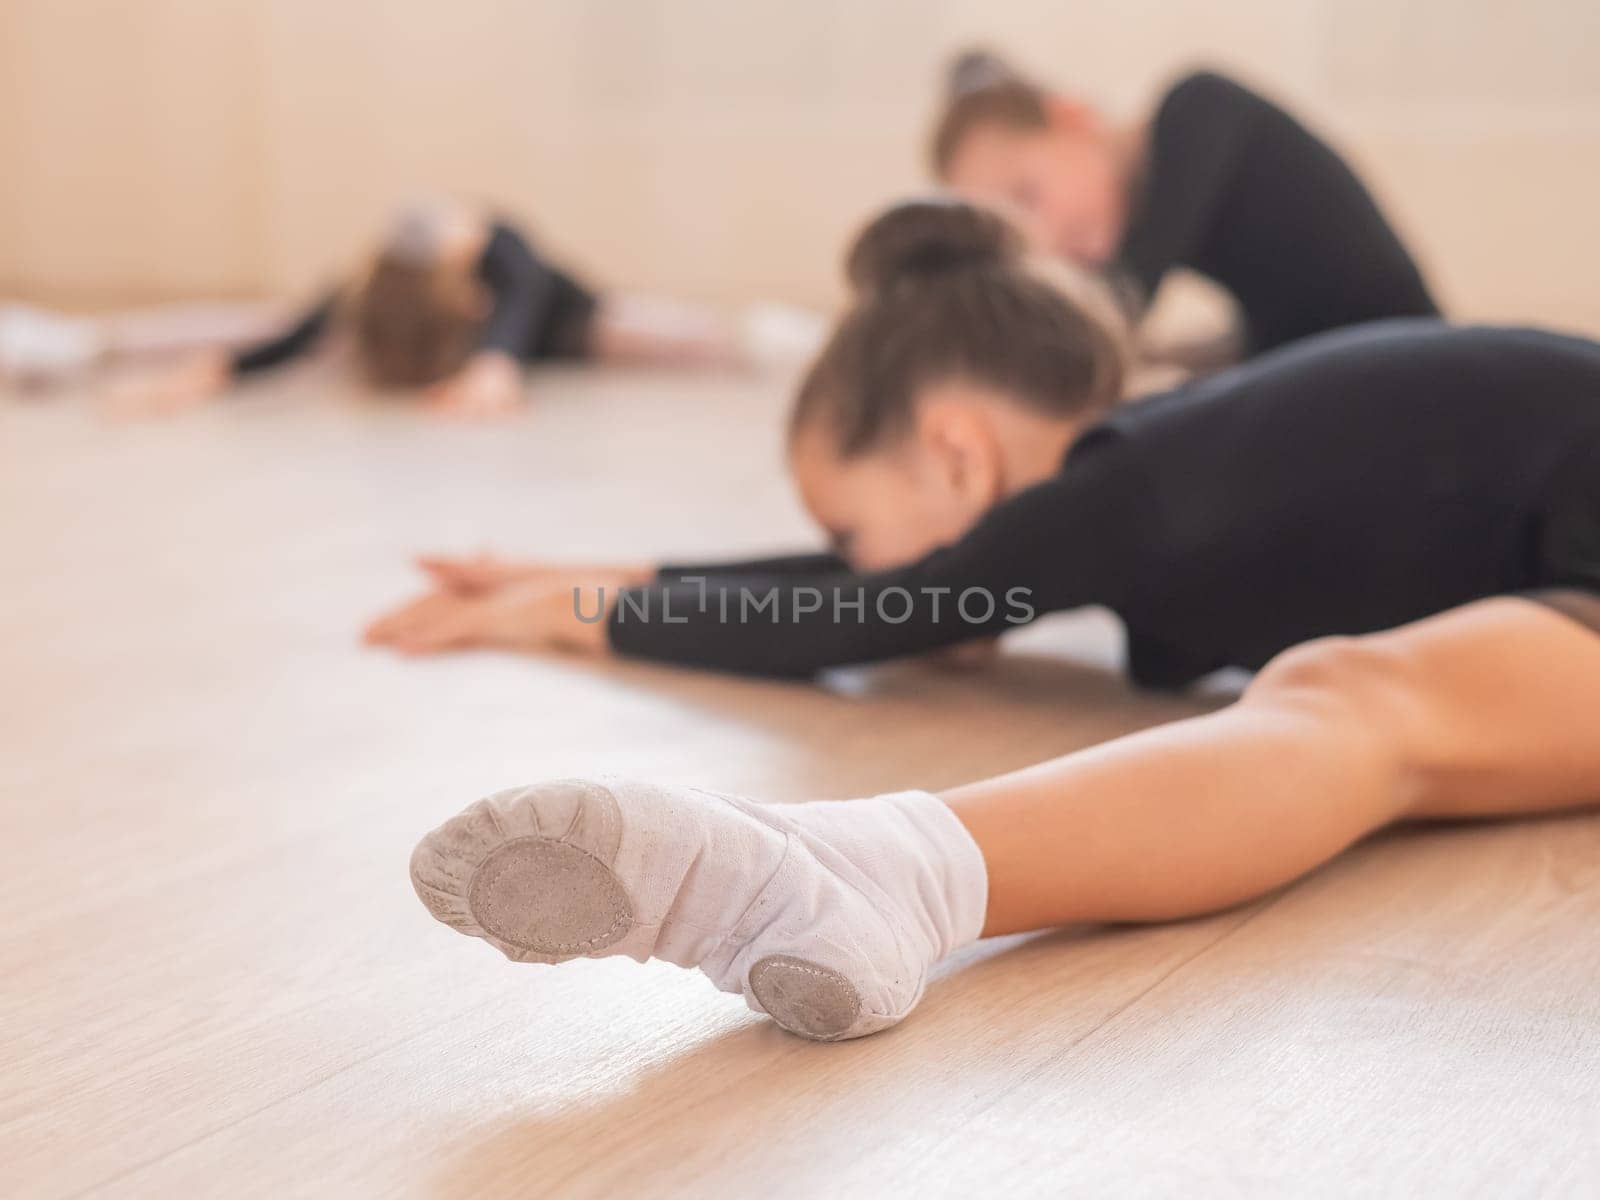 Girls ballerinas stretch while lying in a wide fold